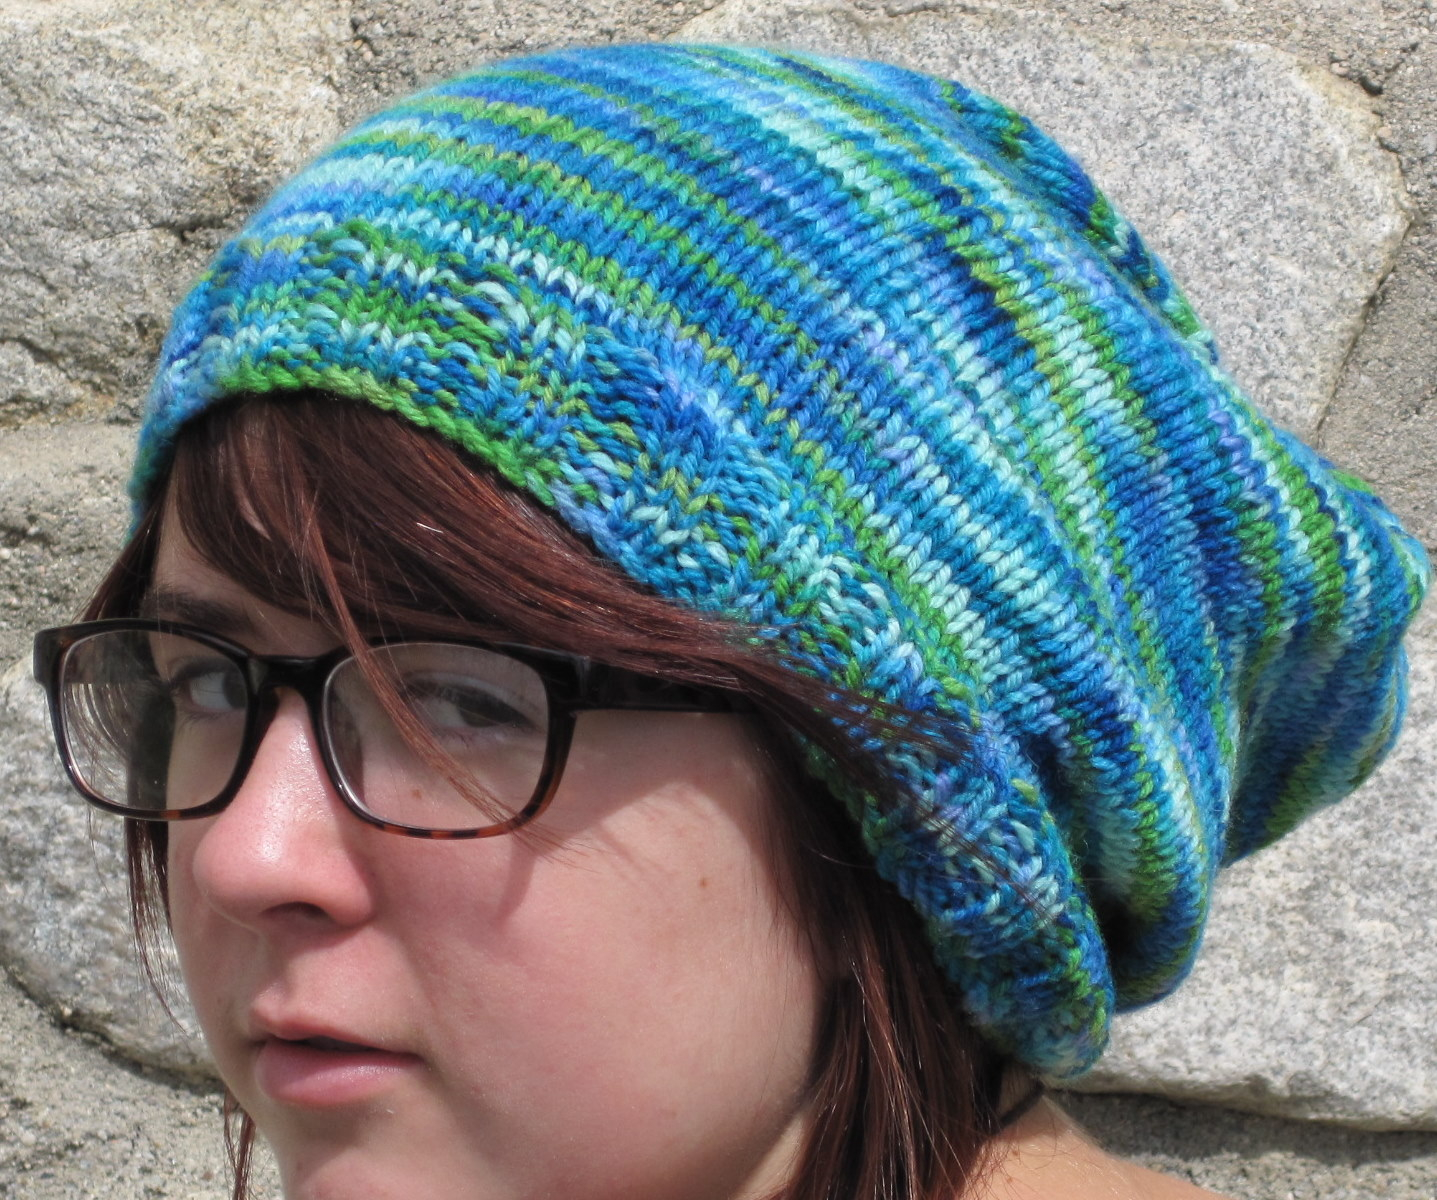 Free Knitting Slouchy Hat Patterns Crafting With Style My Favorite Free Hat Patterns To Knit Or Crochet